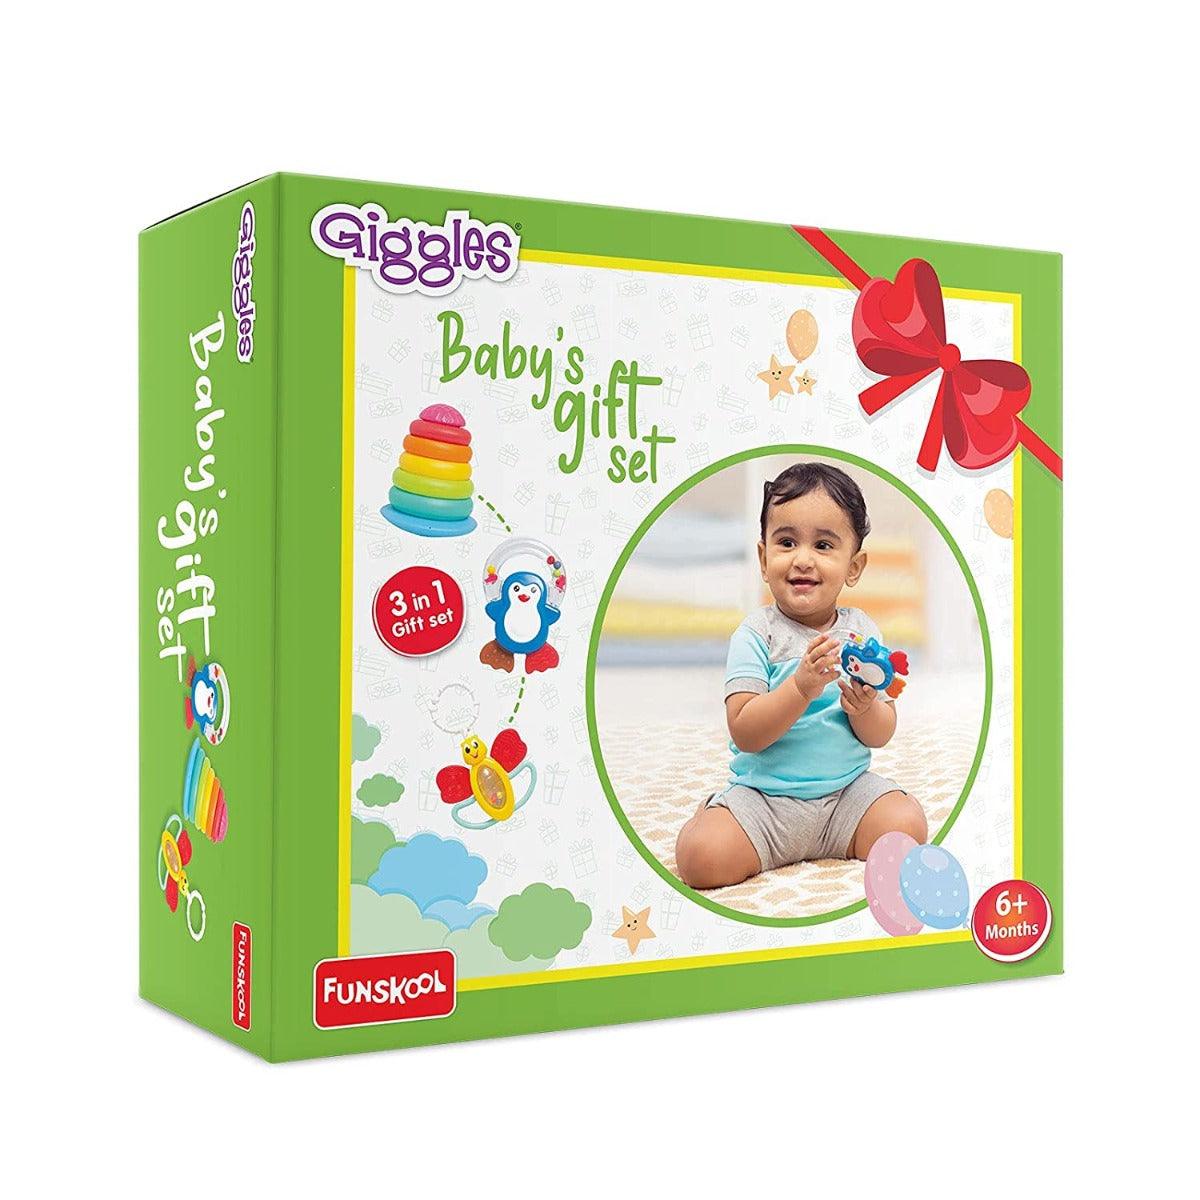 Funskool Giggles Baby's 3 in 1 Gift Set, Stacking Rings, Teether, Rattle for New Born Ages 6 Months & Above